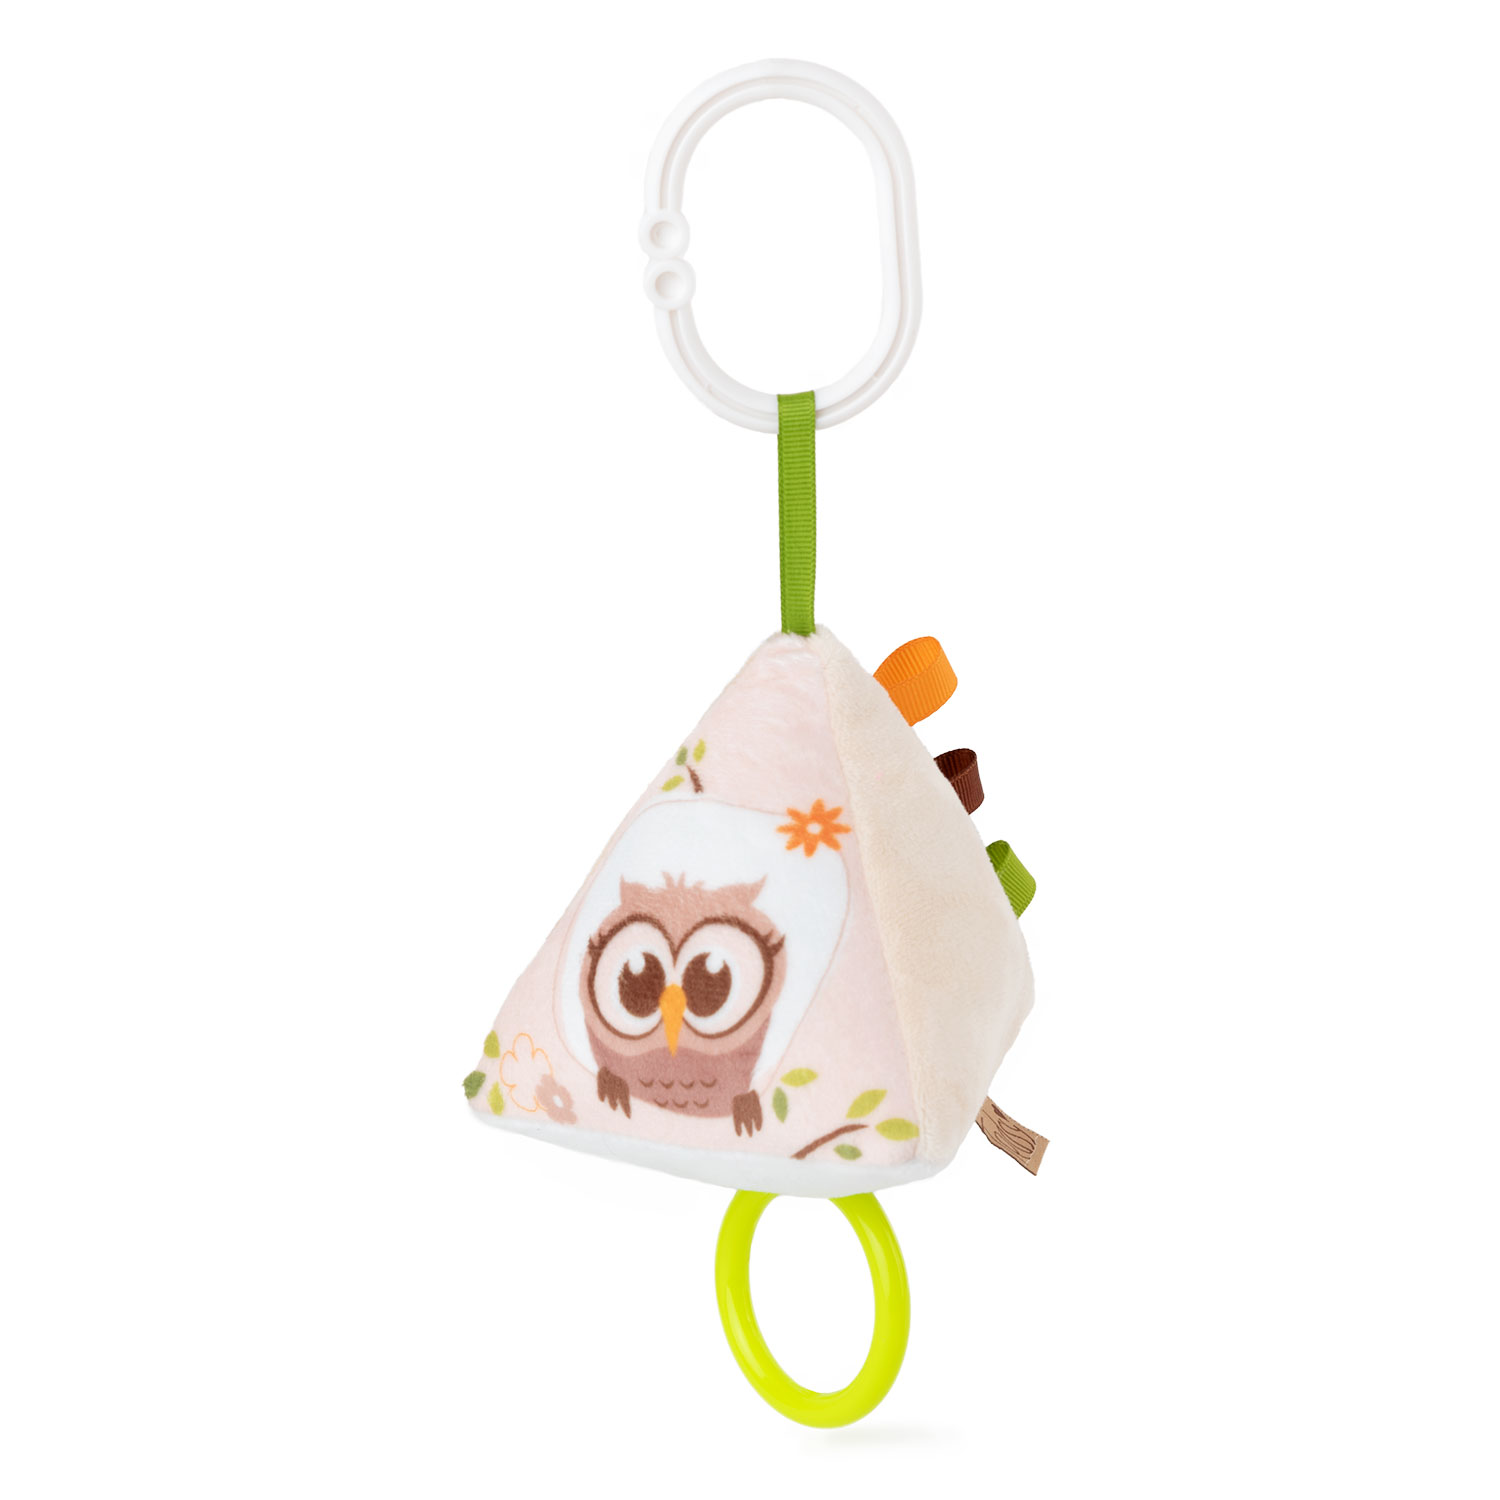 Baby Muiscal toy pyramid - Owl